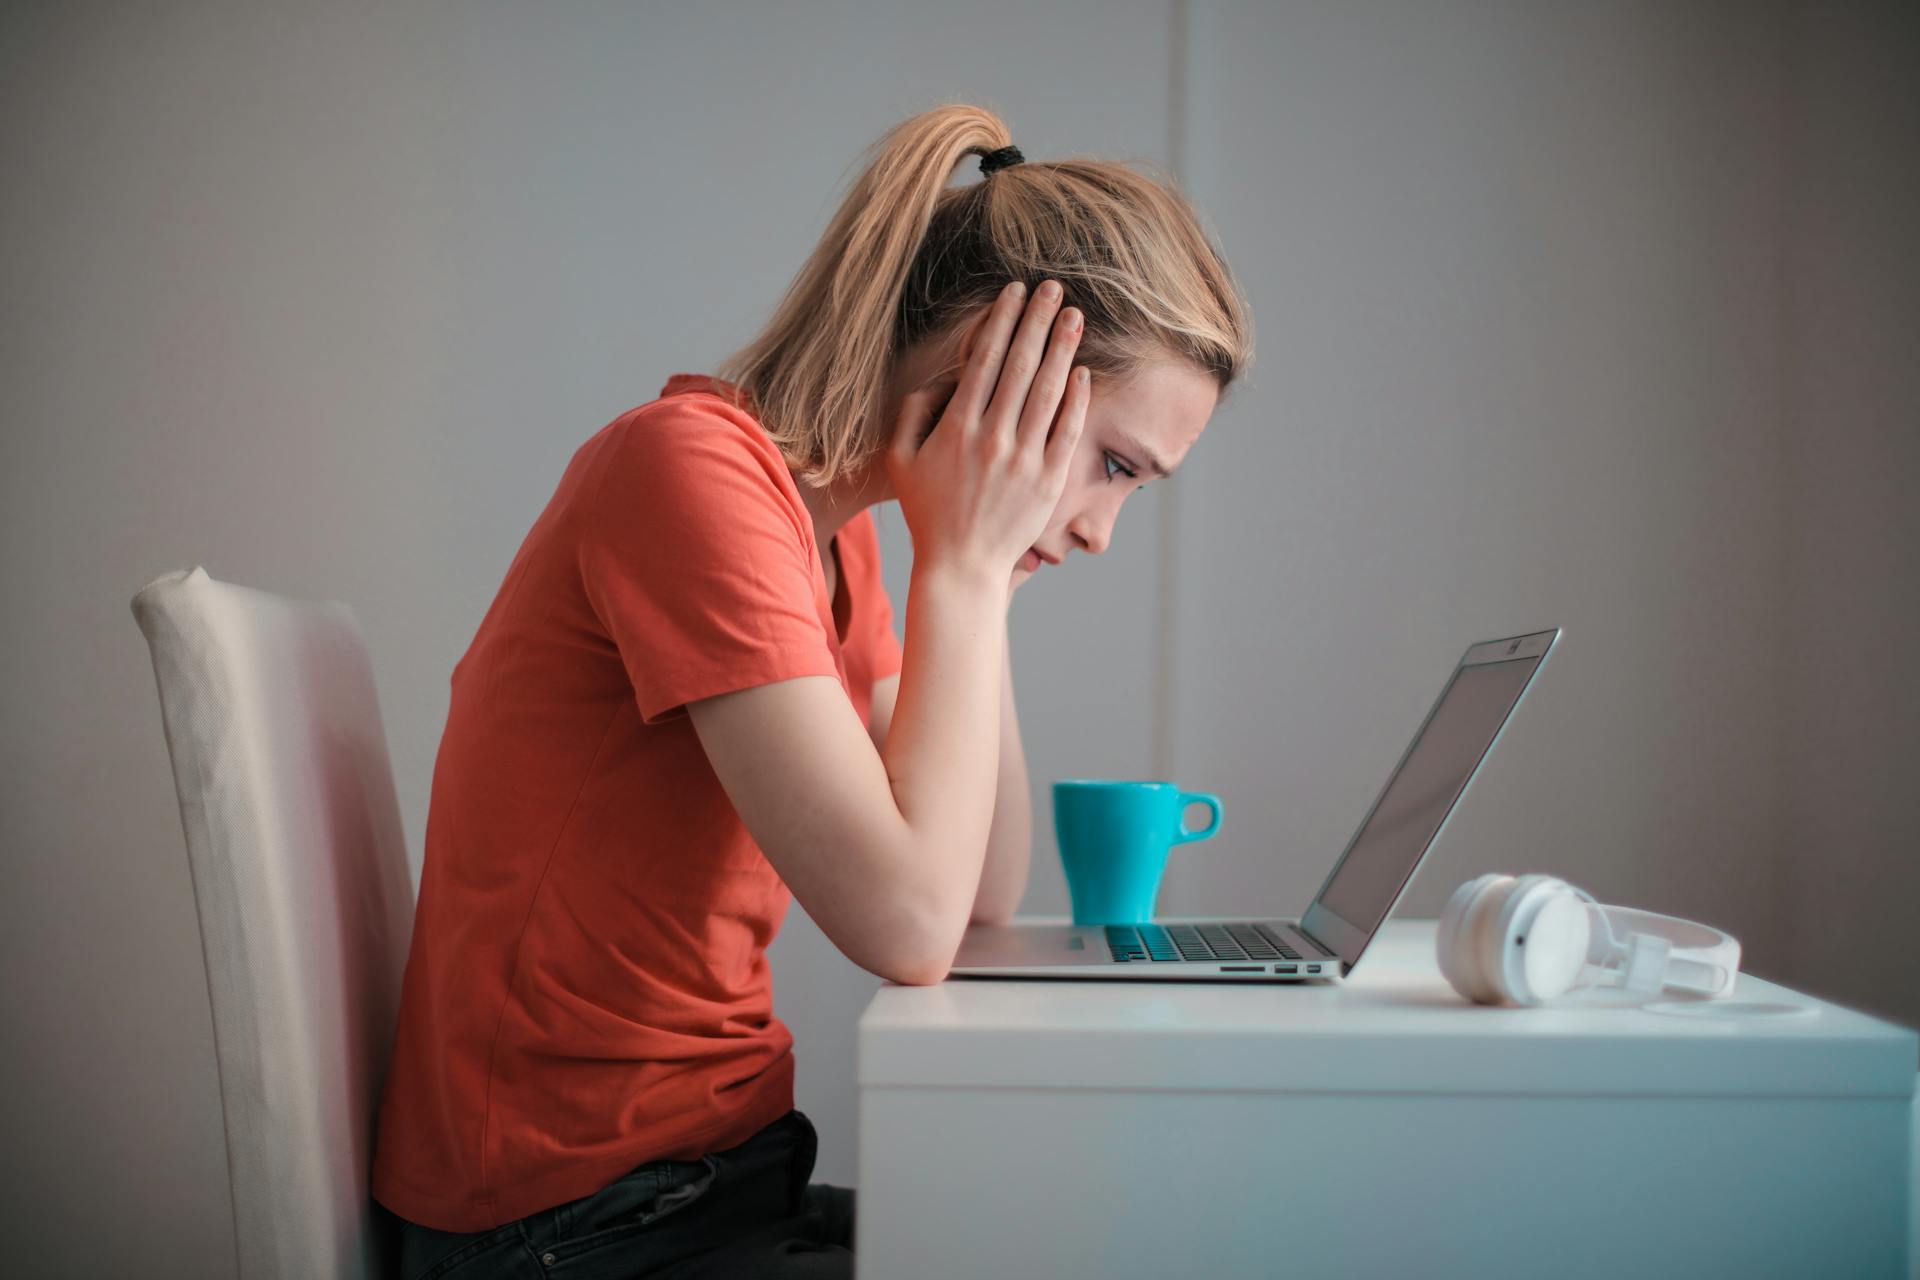 A young woman in a ponytail stares dejectedly down at her laptop with her head in her hands. She is wearing a coral t shirt. A blue mug and white headphones are also on the desk.